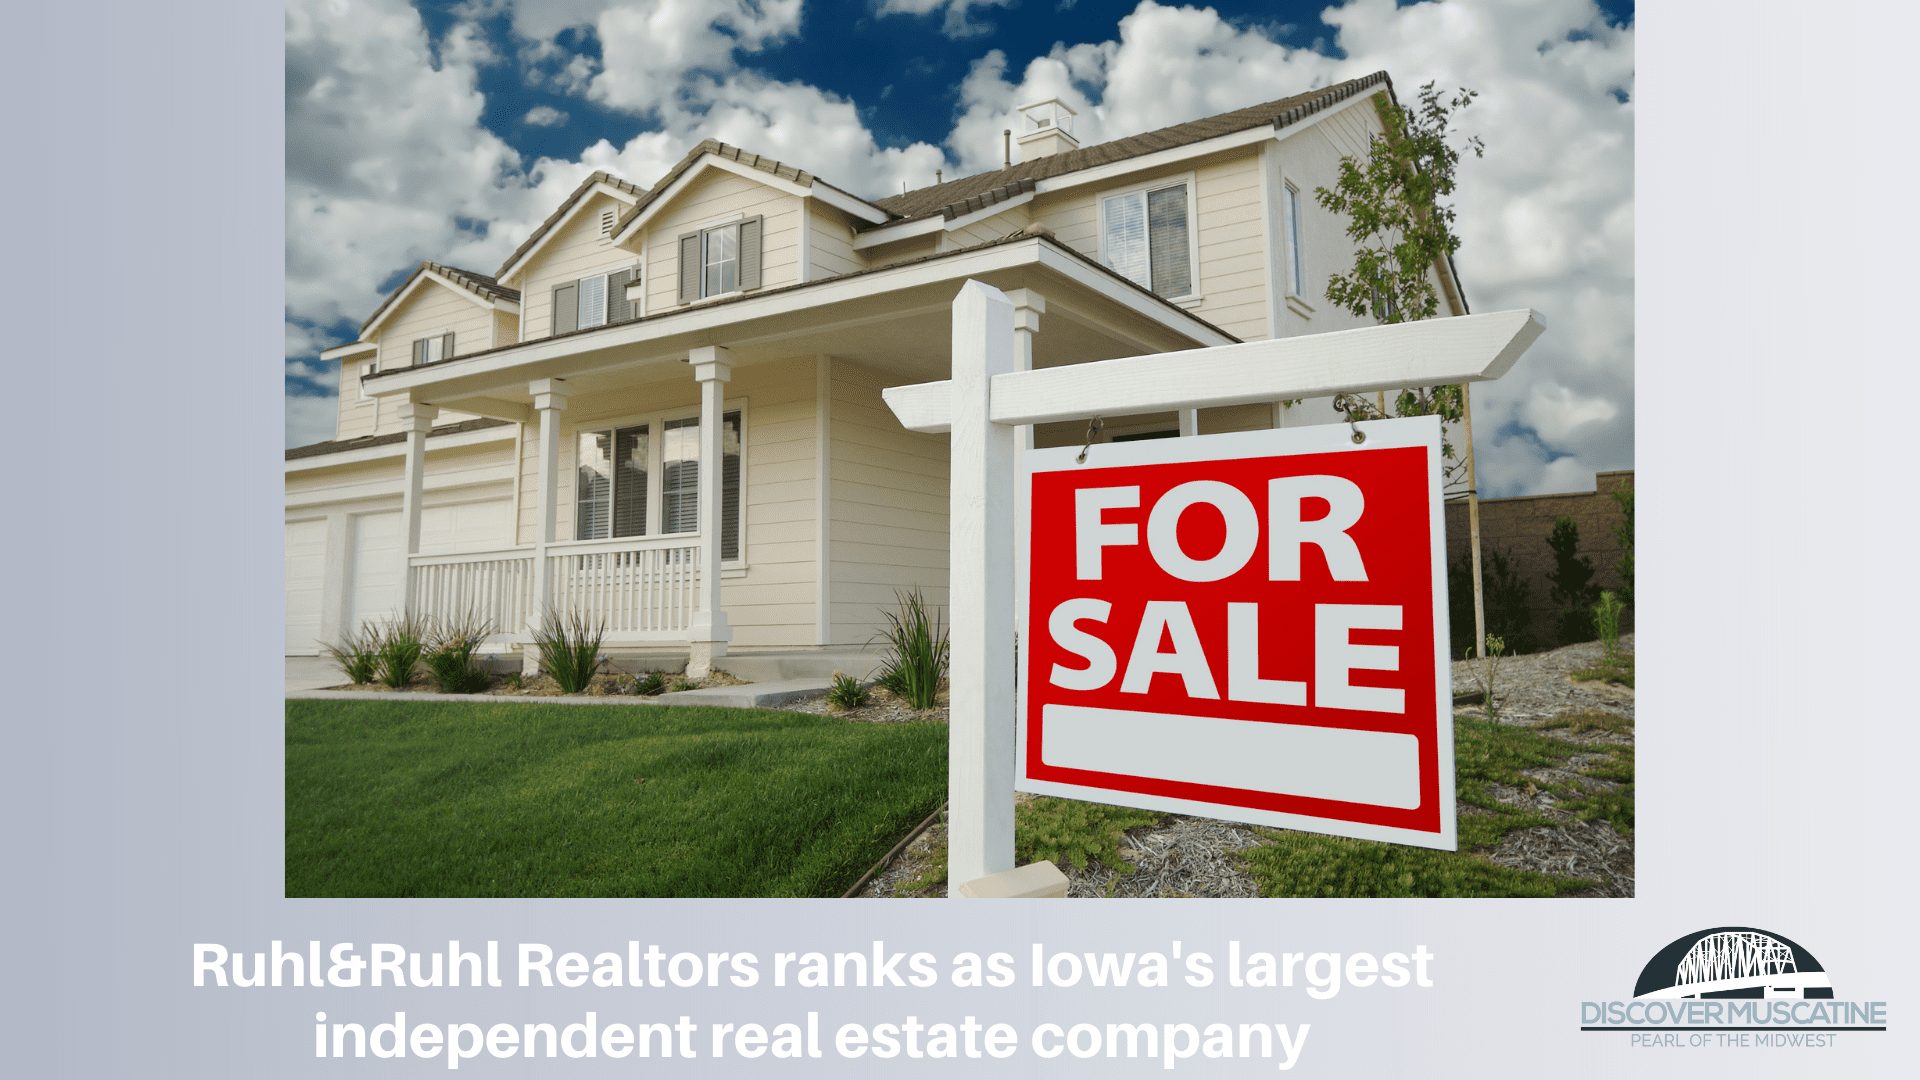 Ruhl&Ruhl Realtors ranks as Iowa’s largest independent real estate company